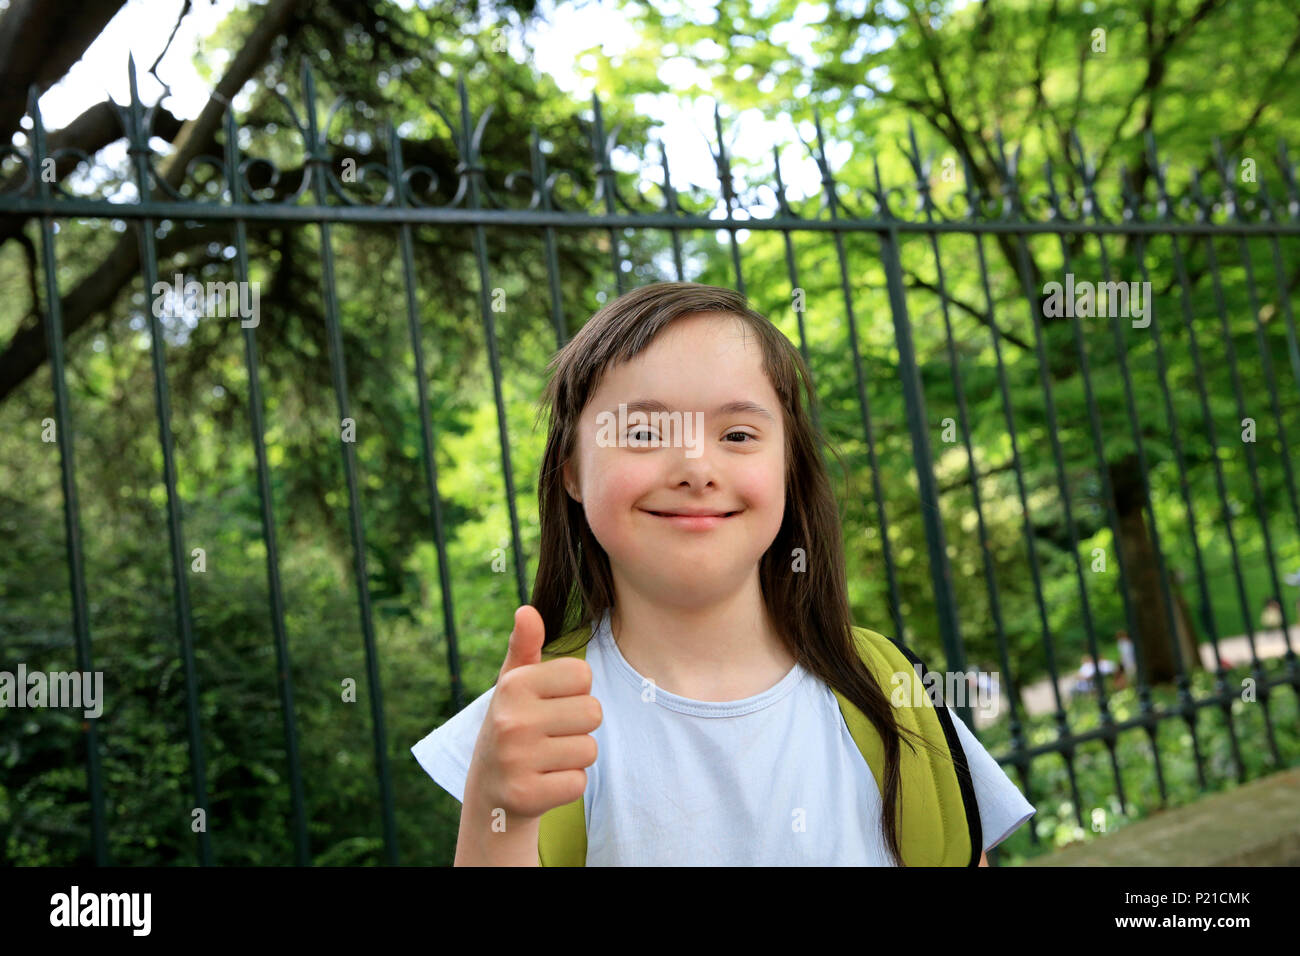 Portrait of little girl smiling in the park Stock Photo